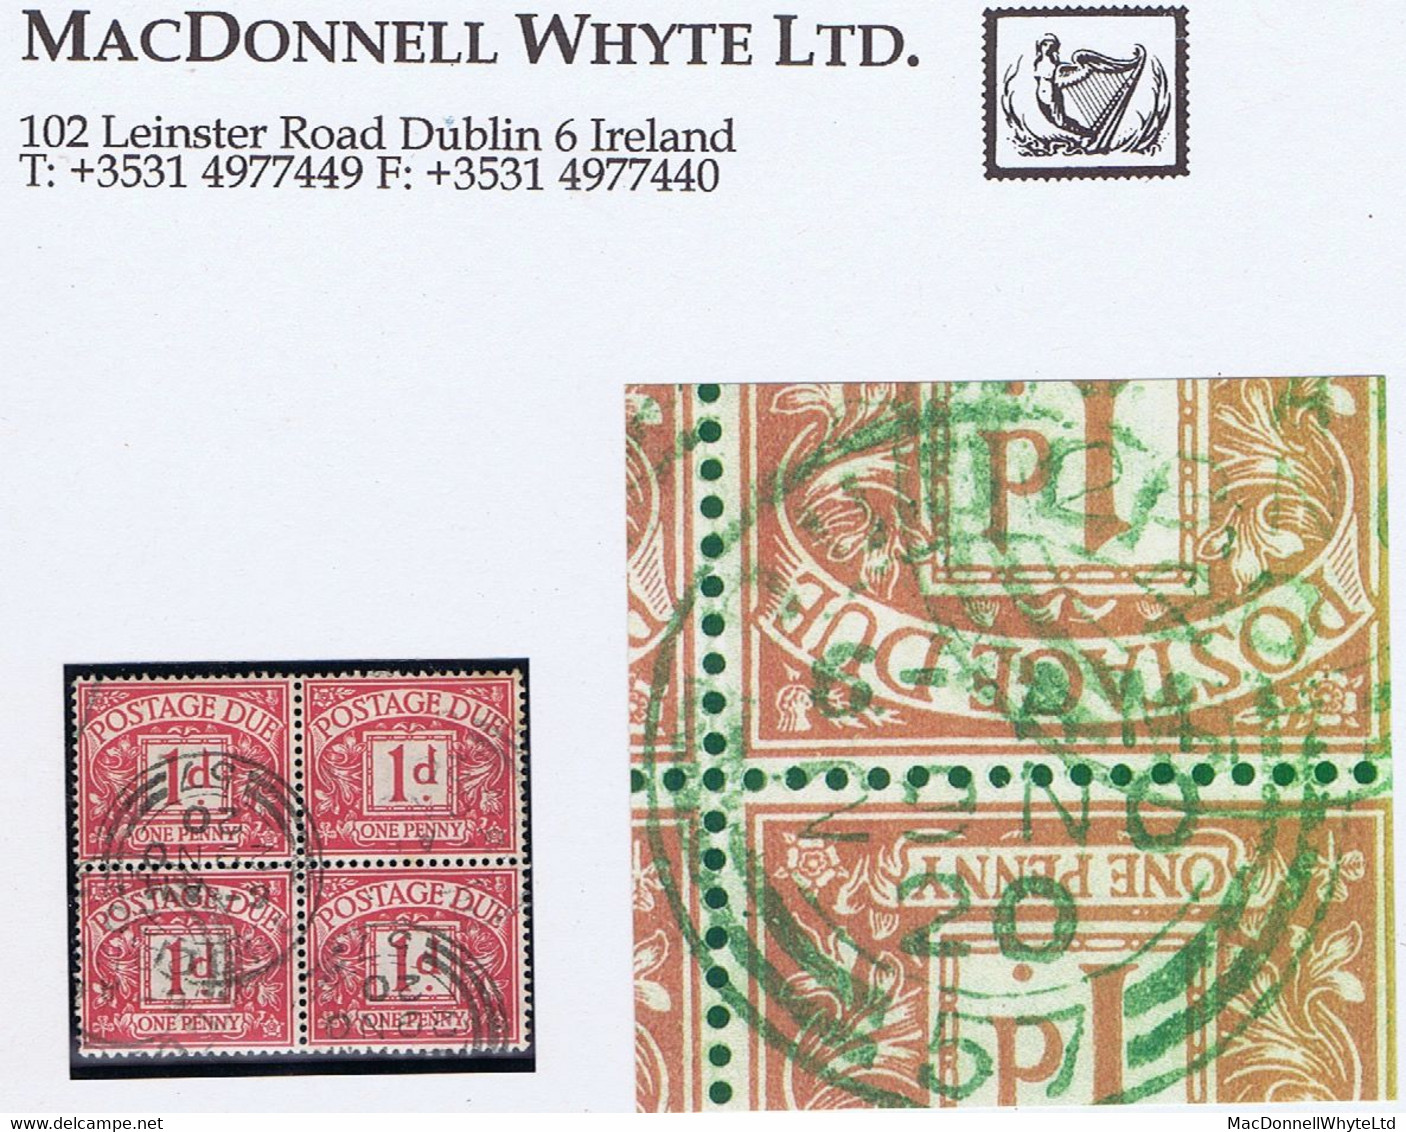 Ireland Postage Due 1920 British POSTAGE DUE 1d Block Of 4 Used With Cds DUBLIN 29 NO 20 Code 57 - Strafport